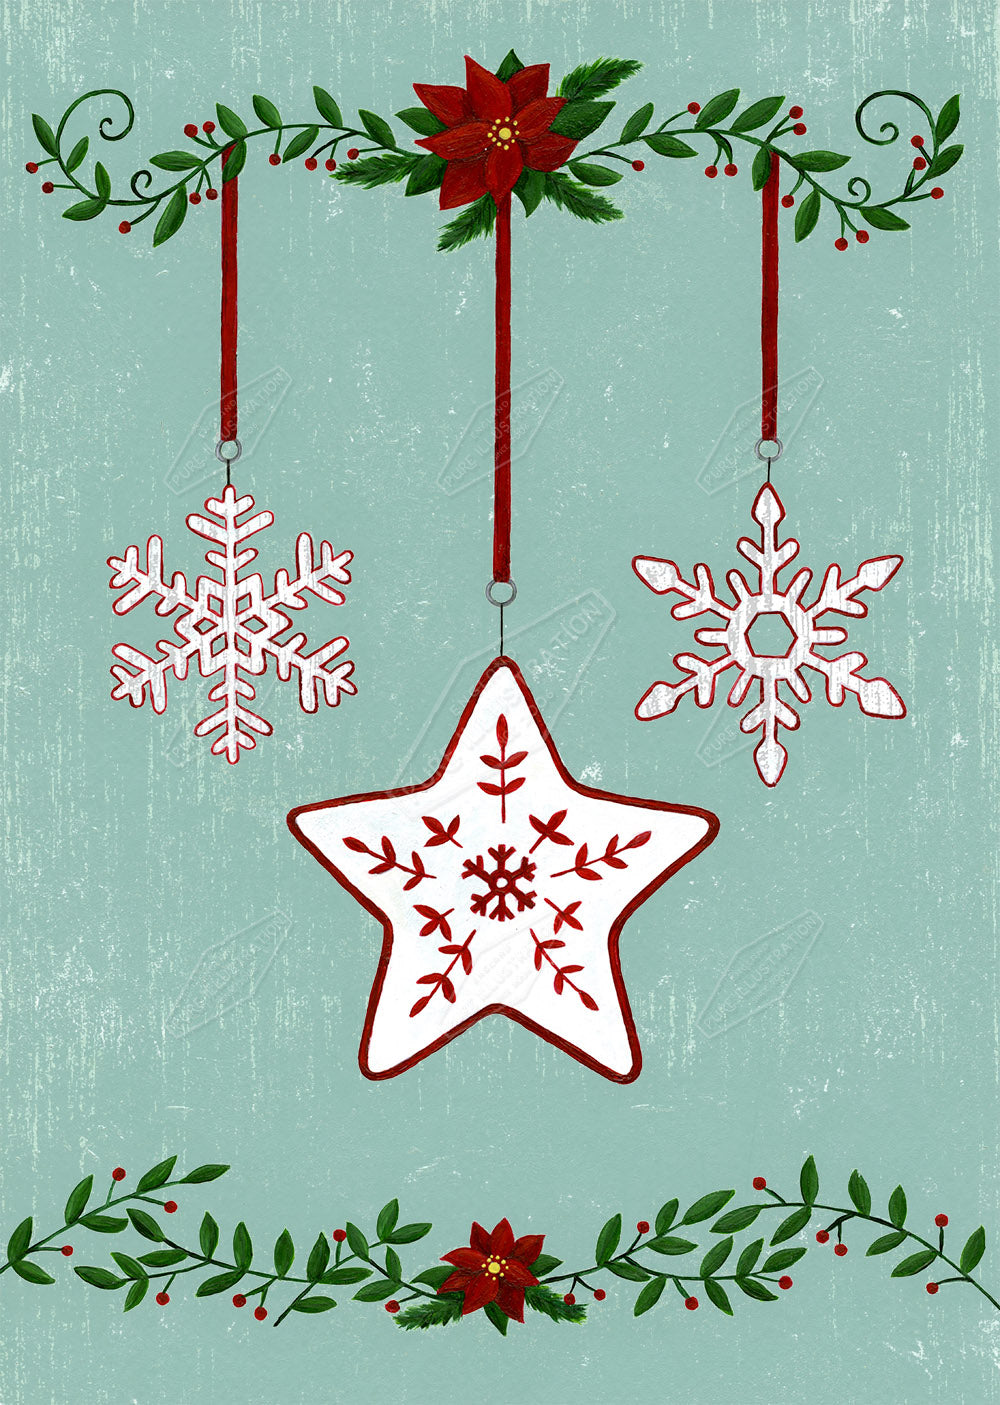 00026913AAI - Folk Christmas Decorations by Anna Aitken - Pure Art Licensing Agency 